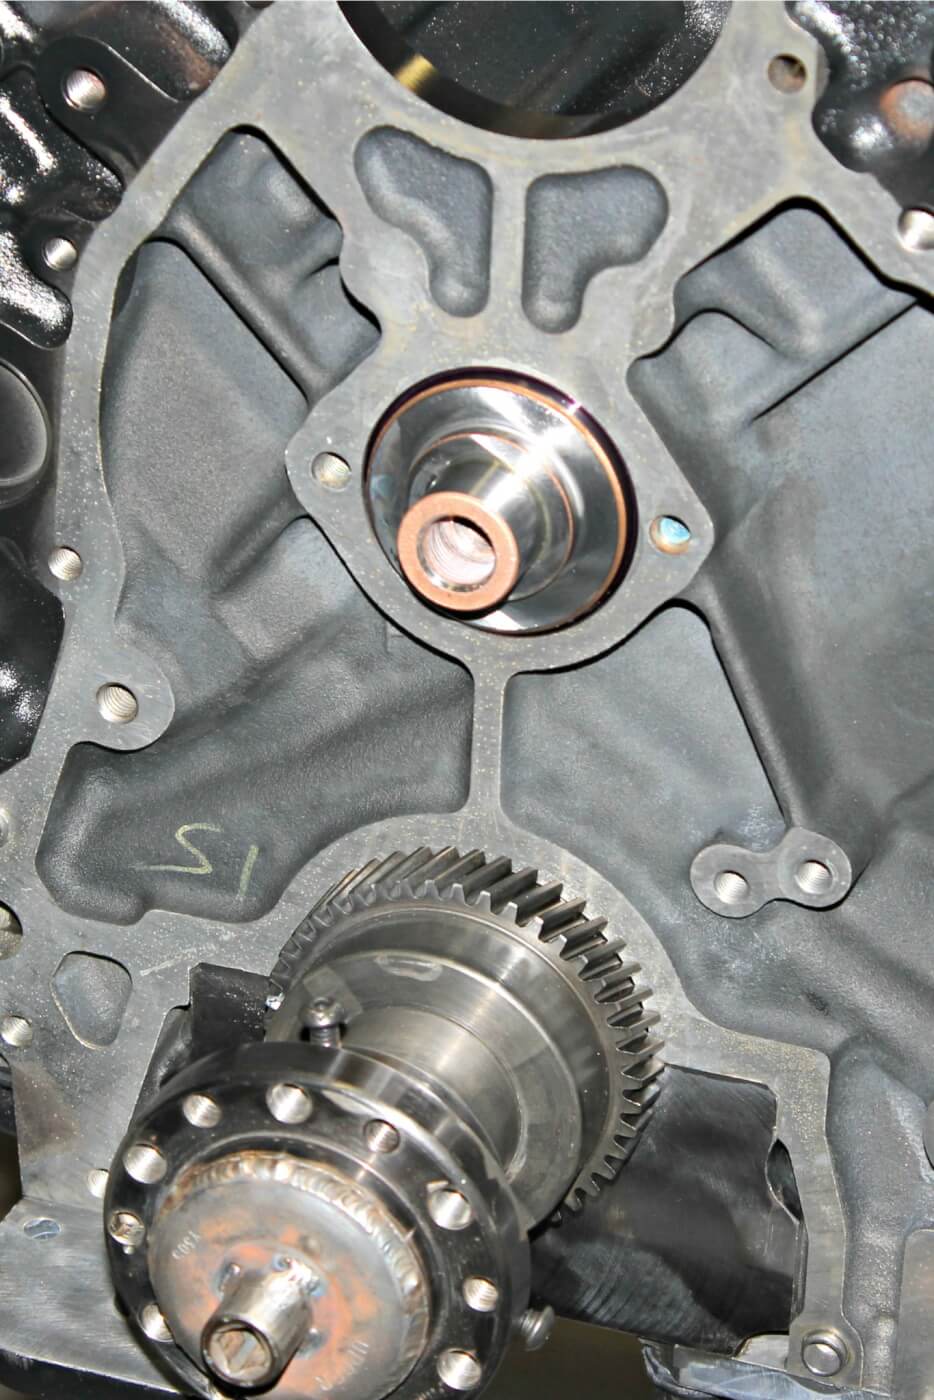 3. After lubing the camshaft with the correct break in oil, it must be slid into the engine block using extreme care. The smallest ding or nick in one of the cam journals or lifter lobes can cause serious engine problems that could lead to poor engine performance and even a catastrophic failure.